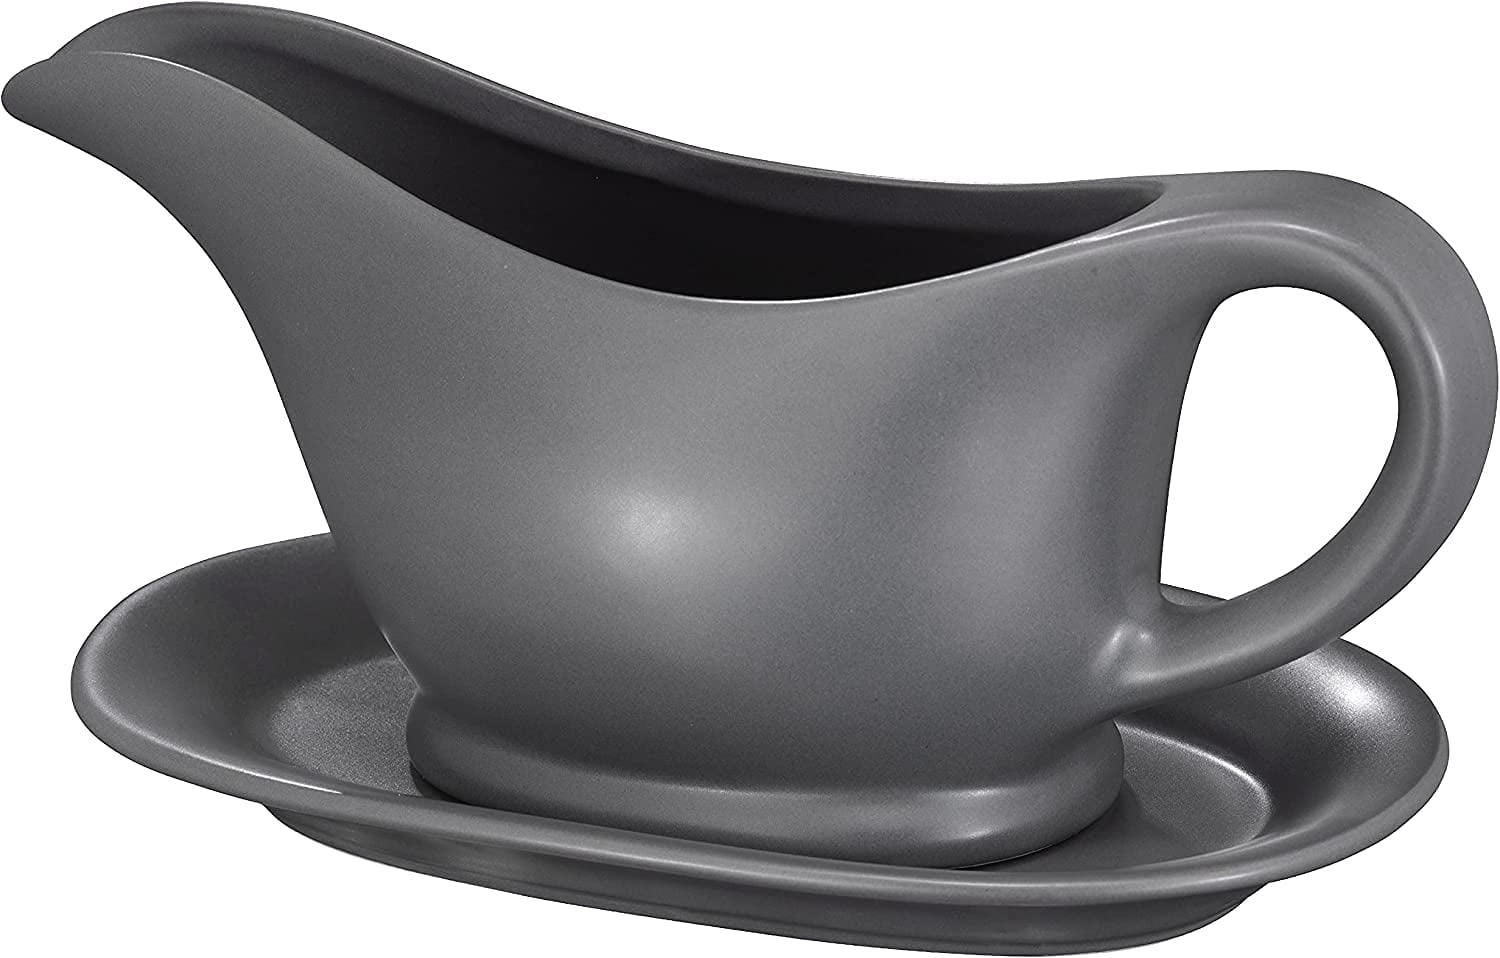 Eastbuy Gravy Boats - Gravy Warmer,304 Stainless Steel Thermal Insulated  Gravy Boat with Lid Double Wall Sauce Gravy Boat Serveware Beverage  Serveware